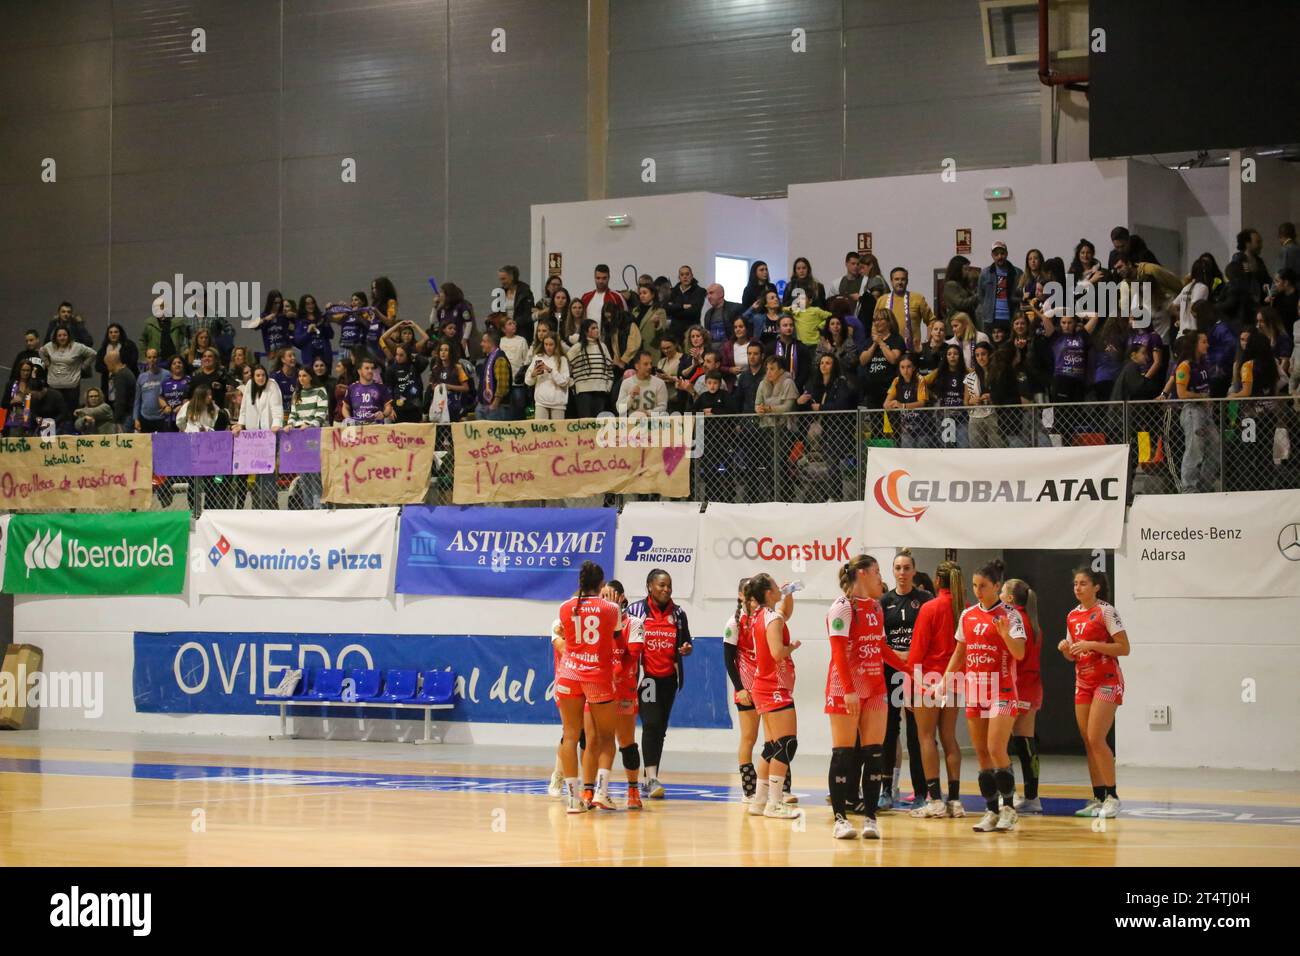 Oviedo, Spain, 1st November, 2023: The Motive.co Gijon Balonmano La Calzada players celebrate the victory with their fans during the 9th Matchday of the Iberdrola Guerreras League between Lobas Global Atac Oviedo and Motive.co Gijon Balonmano La Calzada , on November 1, 2023, at the Florida Arena Municipal Sports Center, in Oviedo, Spain. Credit: Alberto Brevers / Alamy Live News. Stock Photo